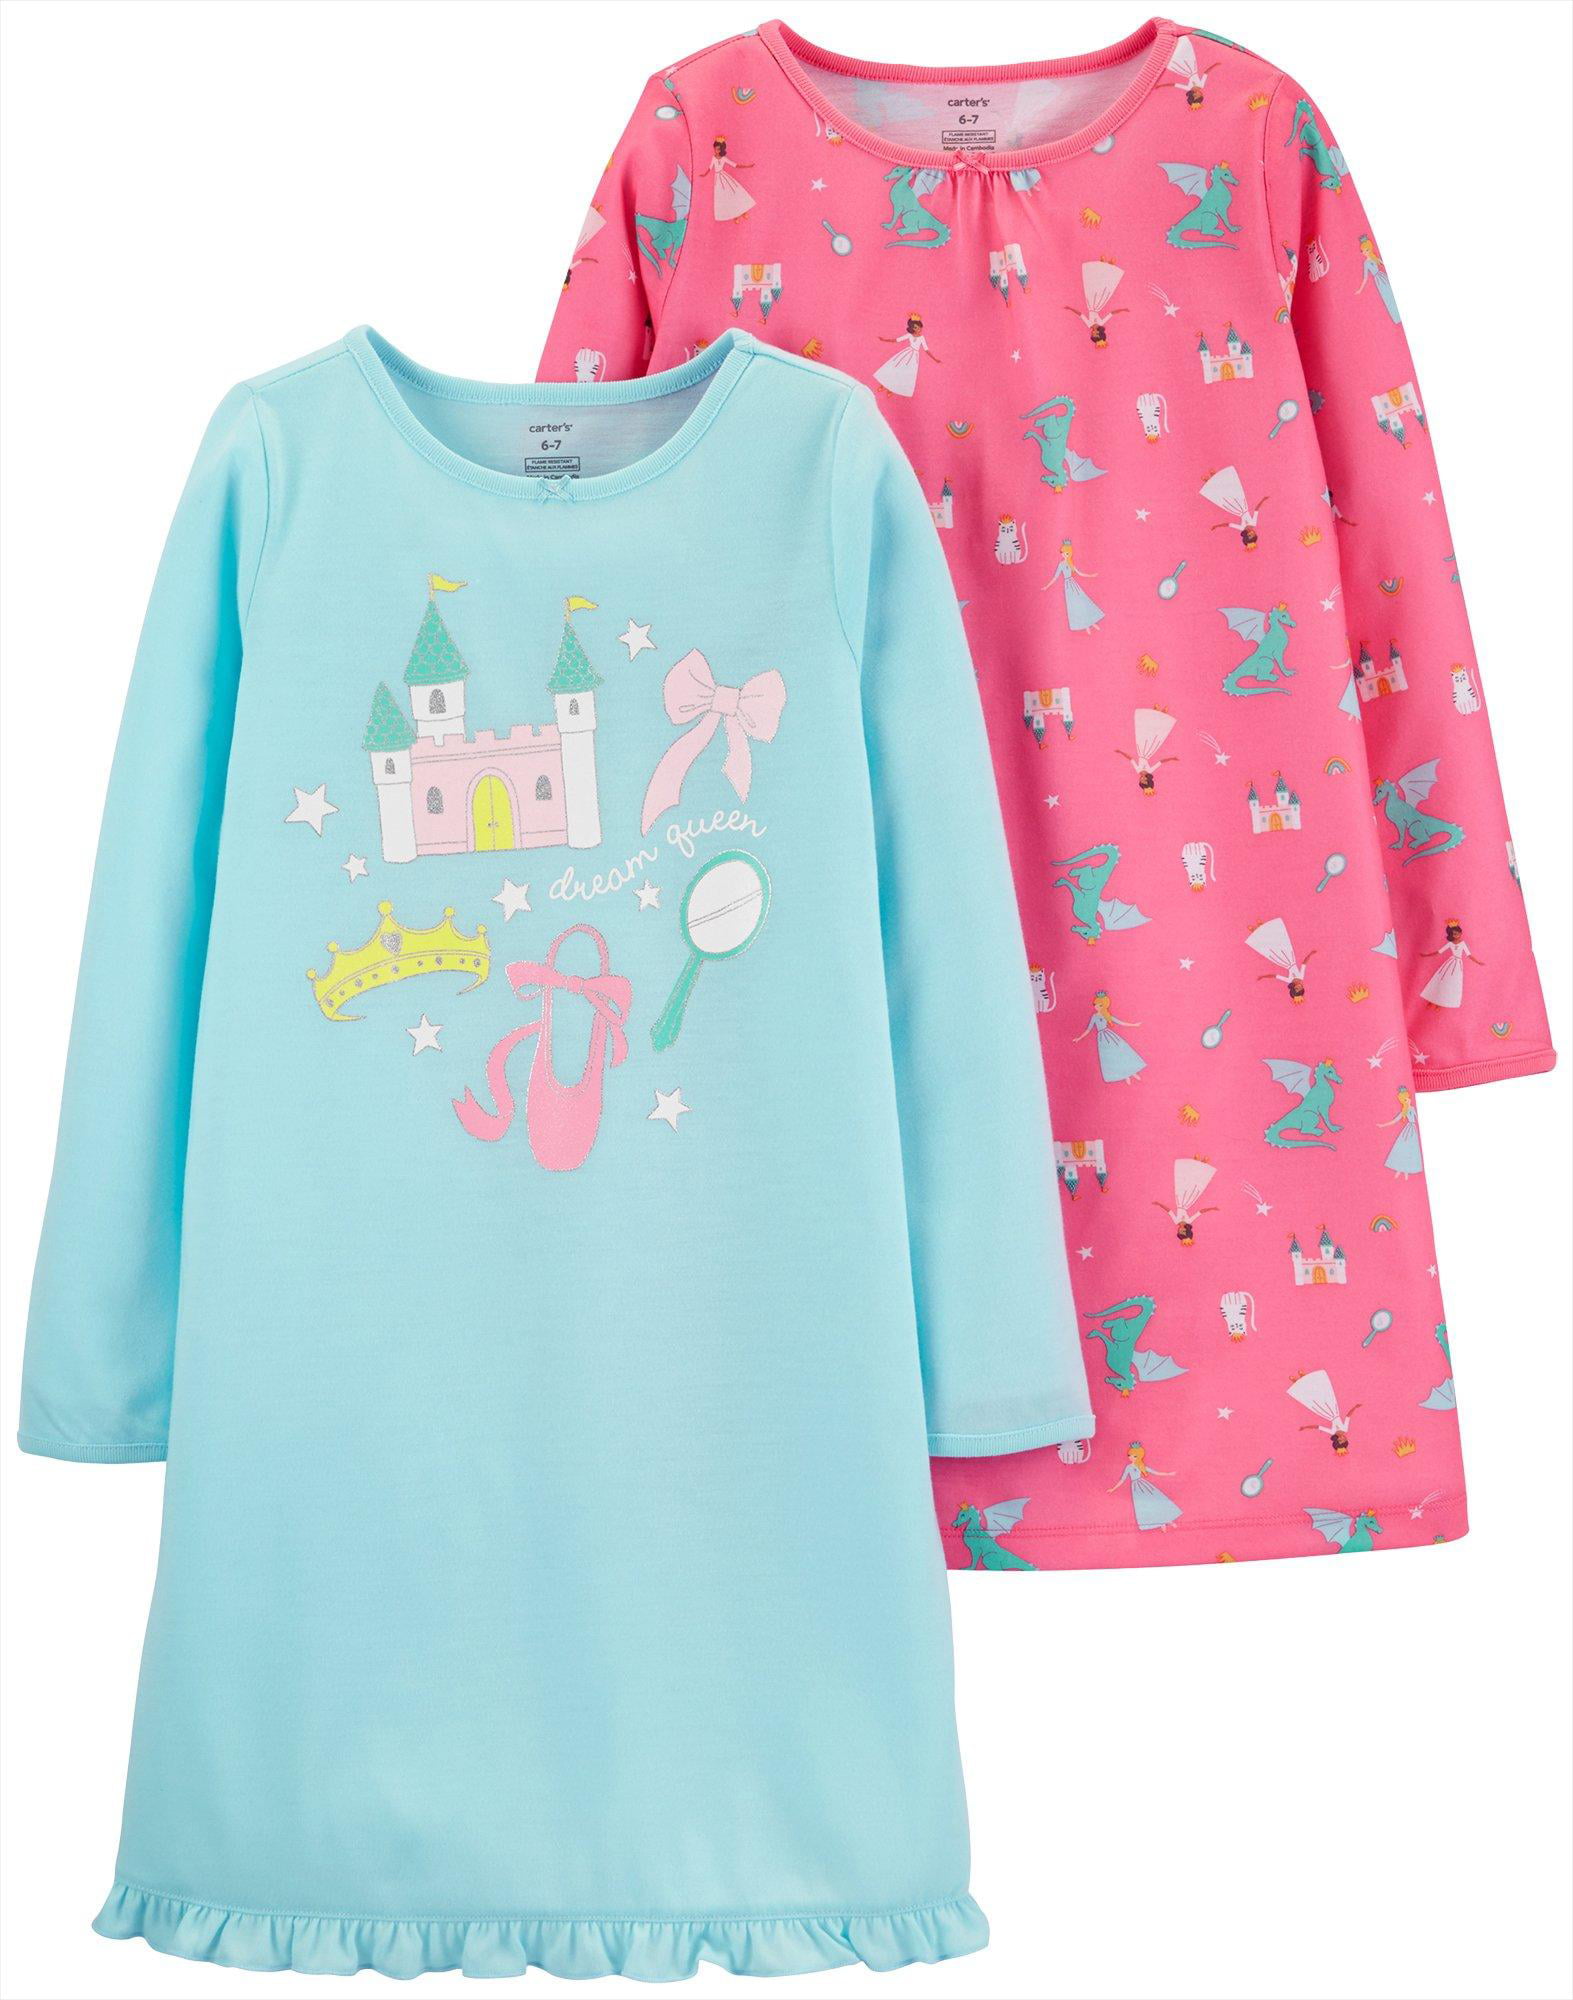 New Girls Carter's 2-Pack Fairy Wishes Nightgowns 4/5 6/7 8/10 